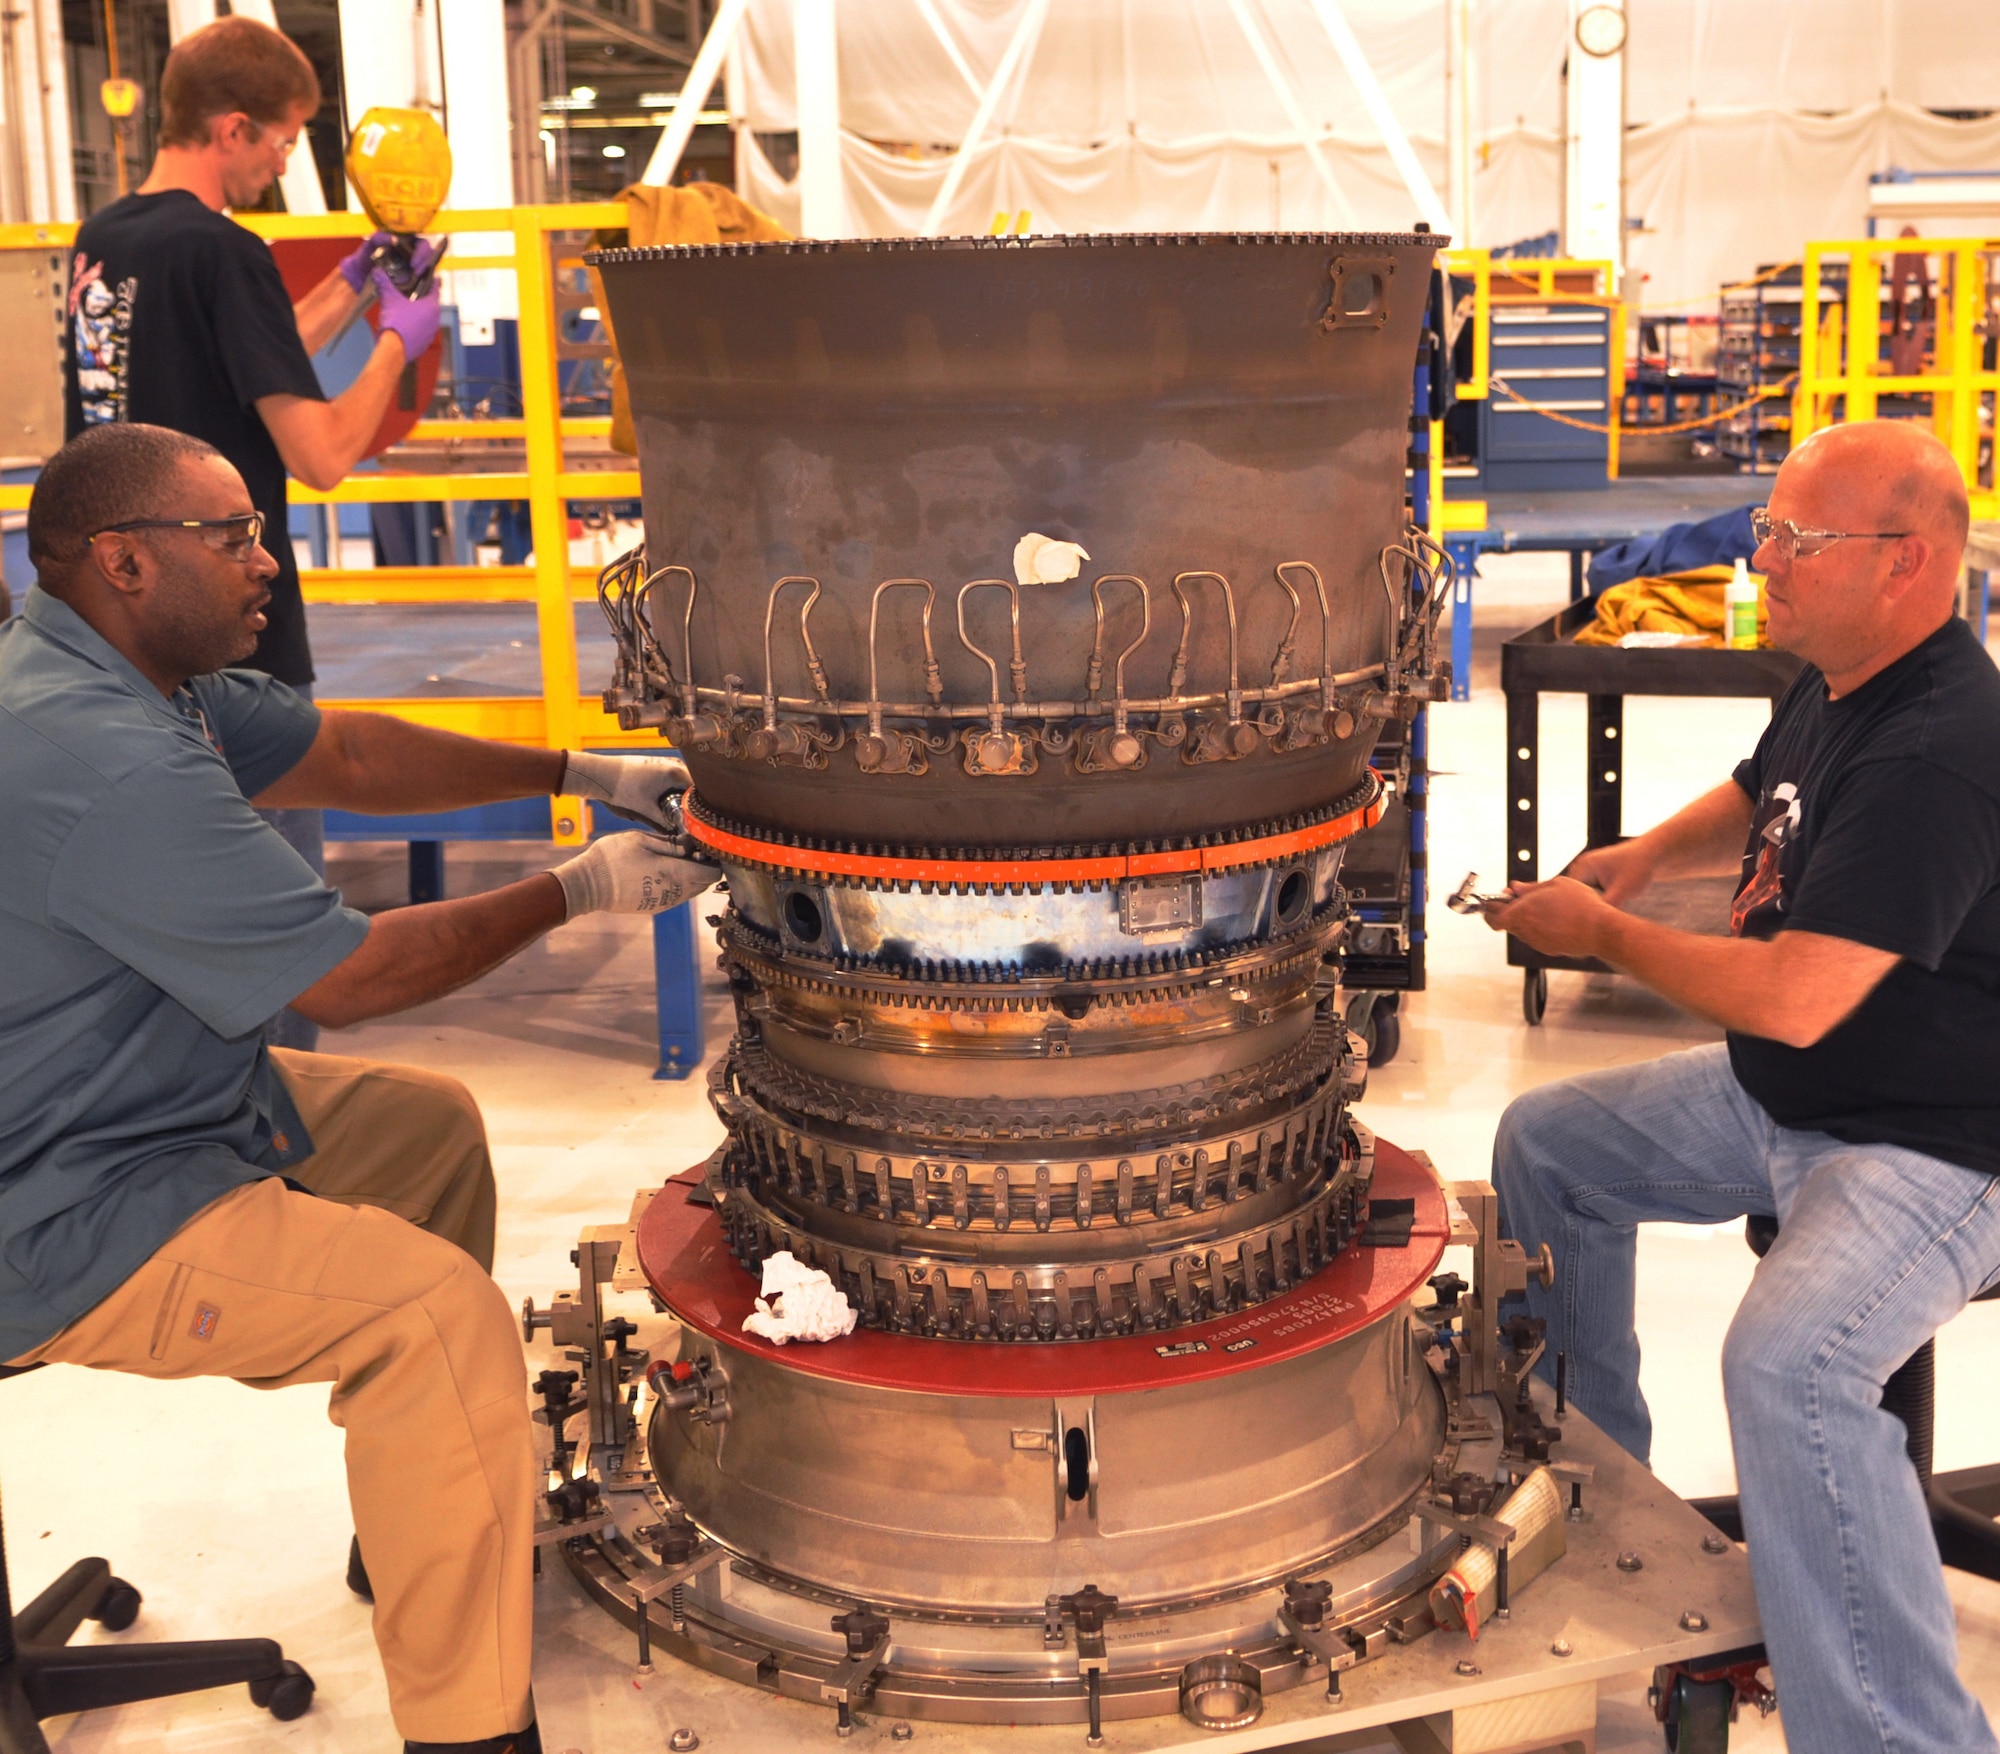 Aircraft mechanics Ira McFadden, left, of the 548th Propulsion Maintenance Squadron, and Mike Blackmore of the 76th Propulsion Maintenance Group torque the diffuser on an F119 jet engine. The diffuser is where the jet fuel is atomized, or reduced to a fine spray.(U.S. Air Force photo by Mike Ray)